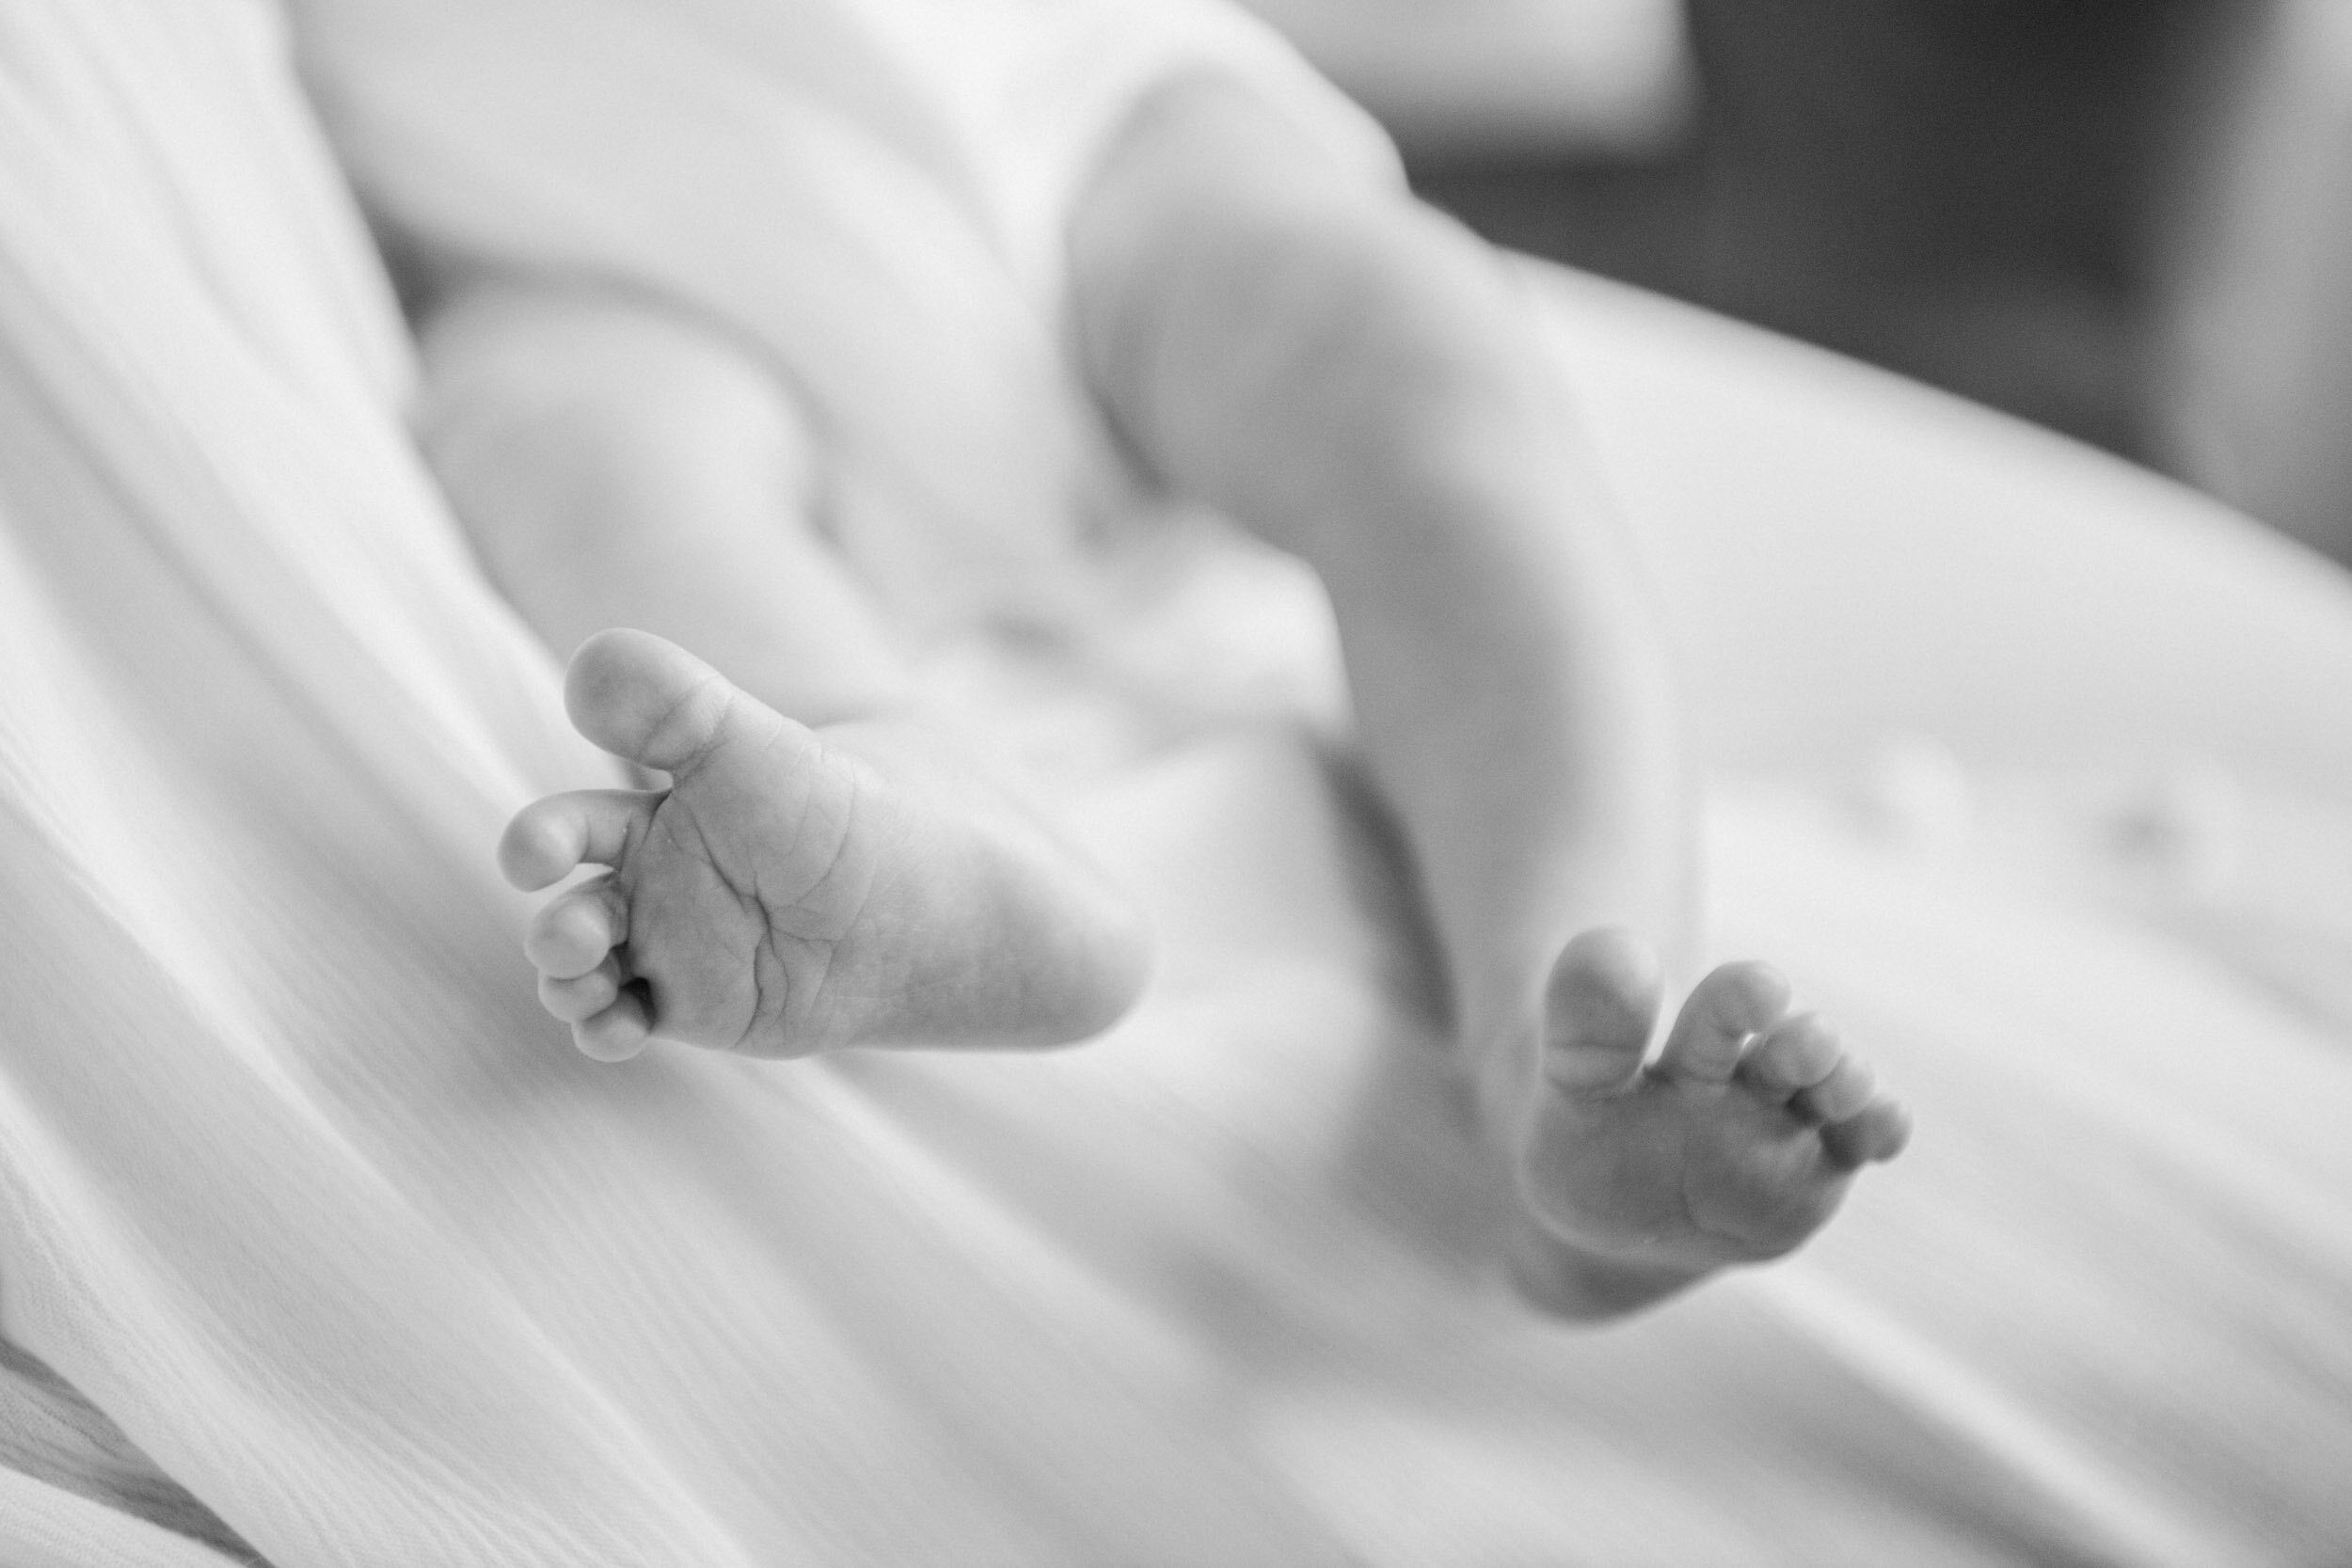 NYC_newborn_photographer_natural_light_in_home_lifestyle_session_with_dog_NicoleHawkinsPhotography_2020-15.jpg